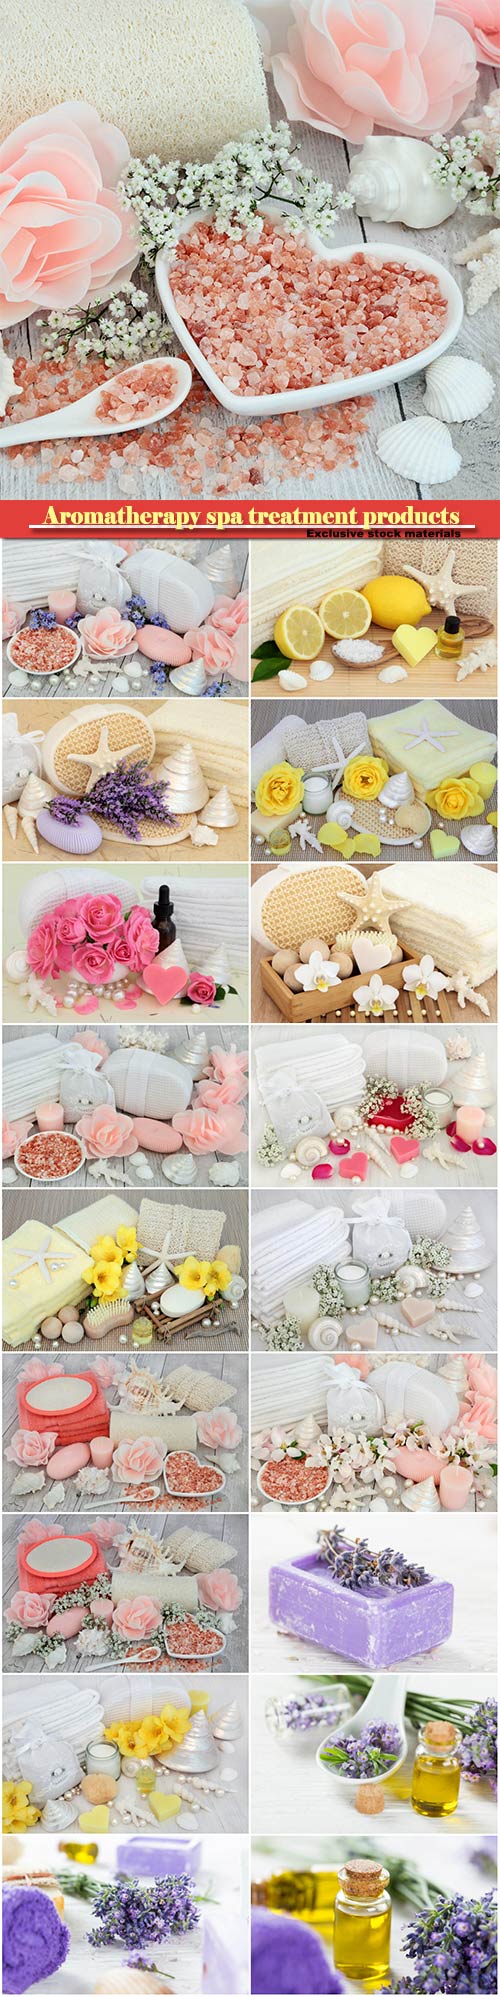 Aromatherapy spa treatment products with moisturiser, essence, freesia flowers, lavender flowers, shells and pearls